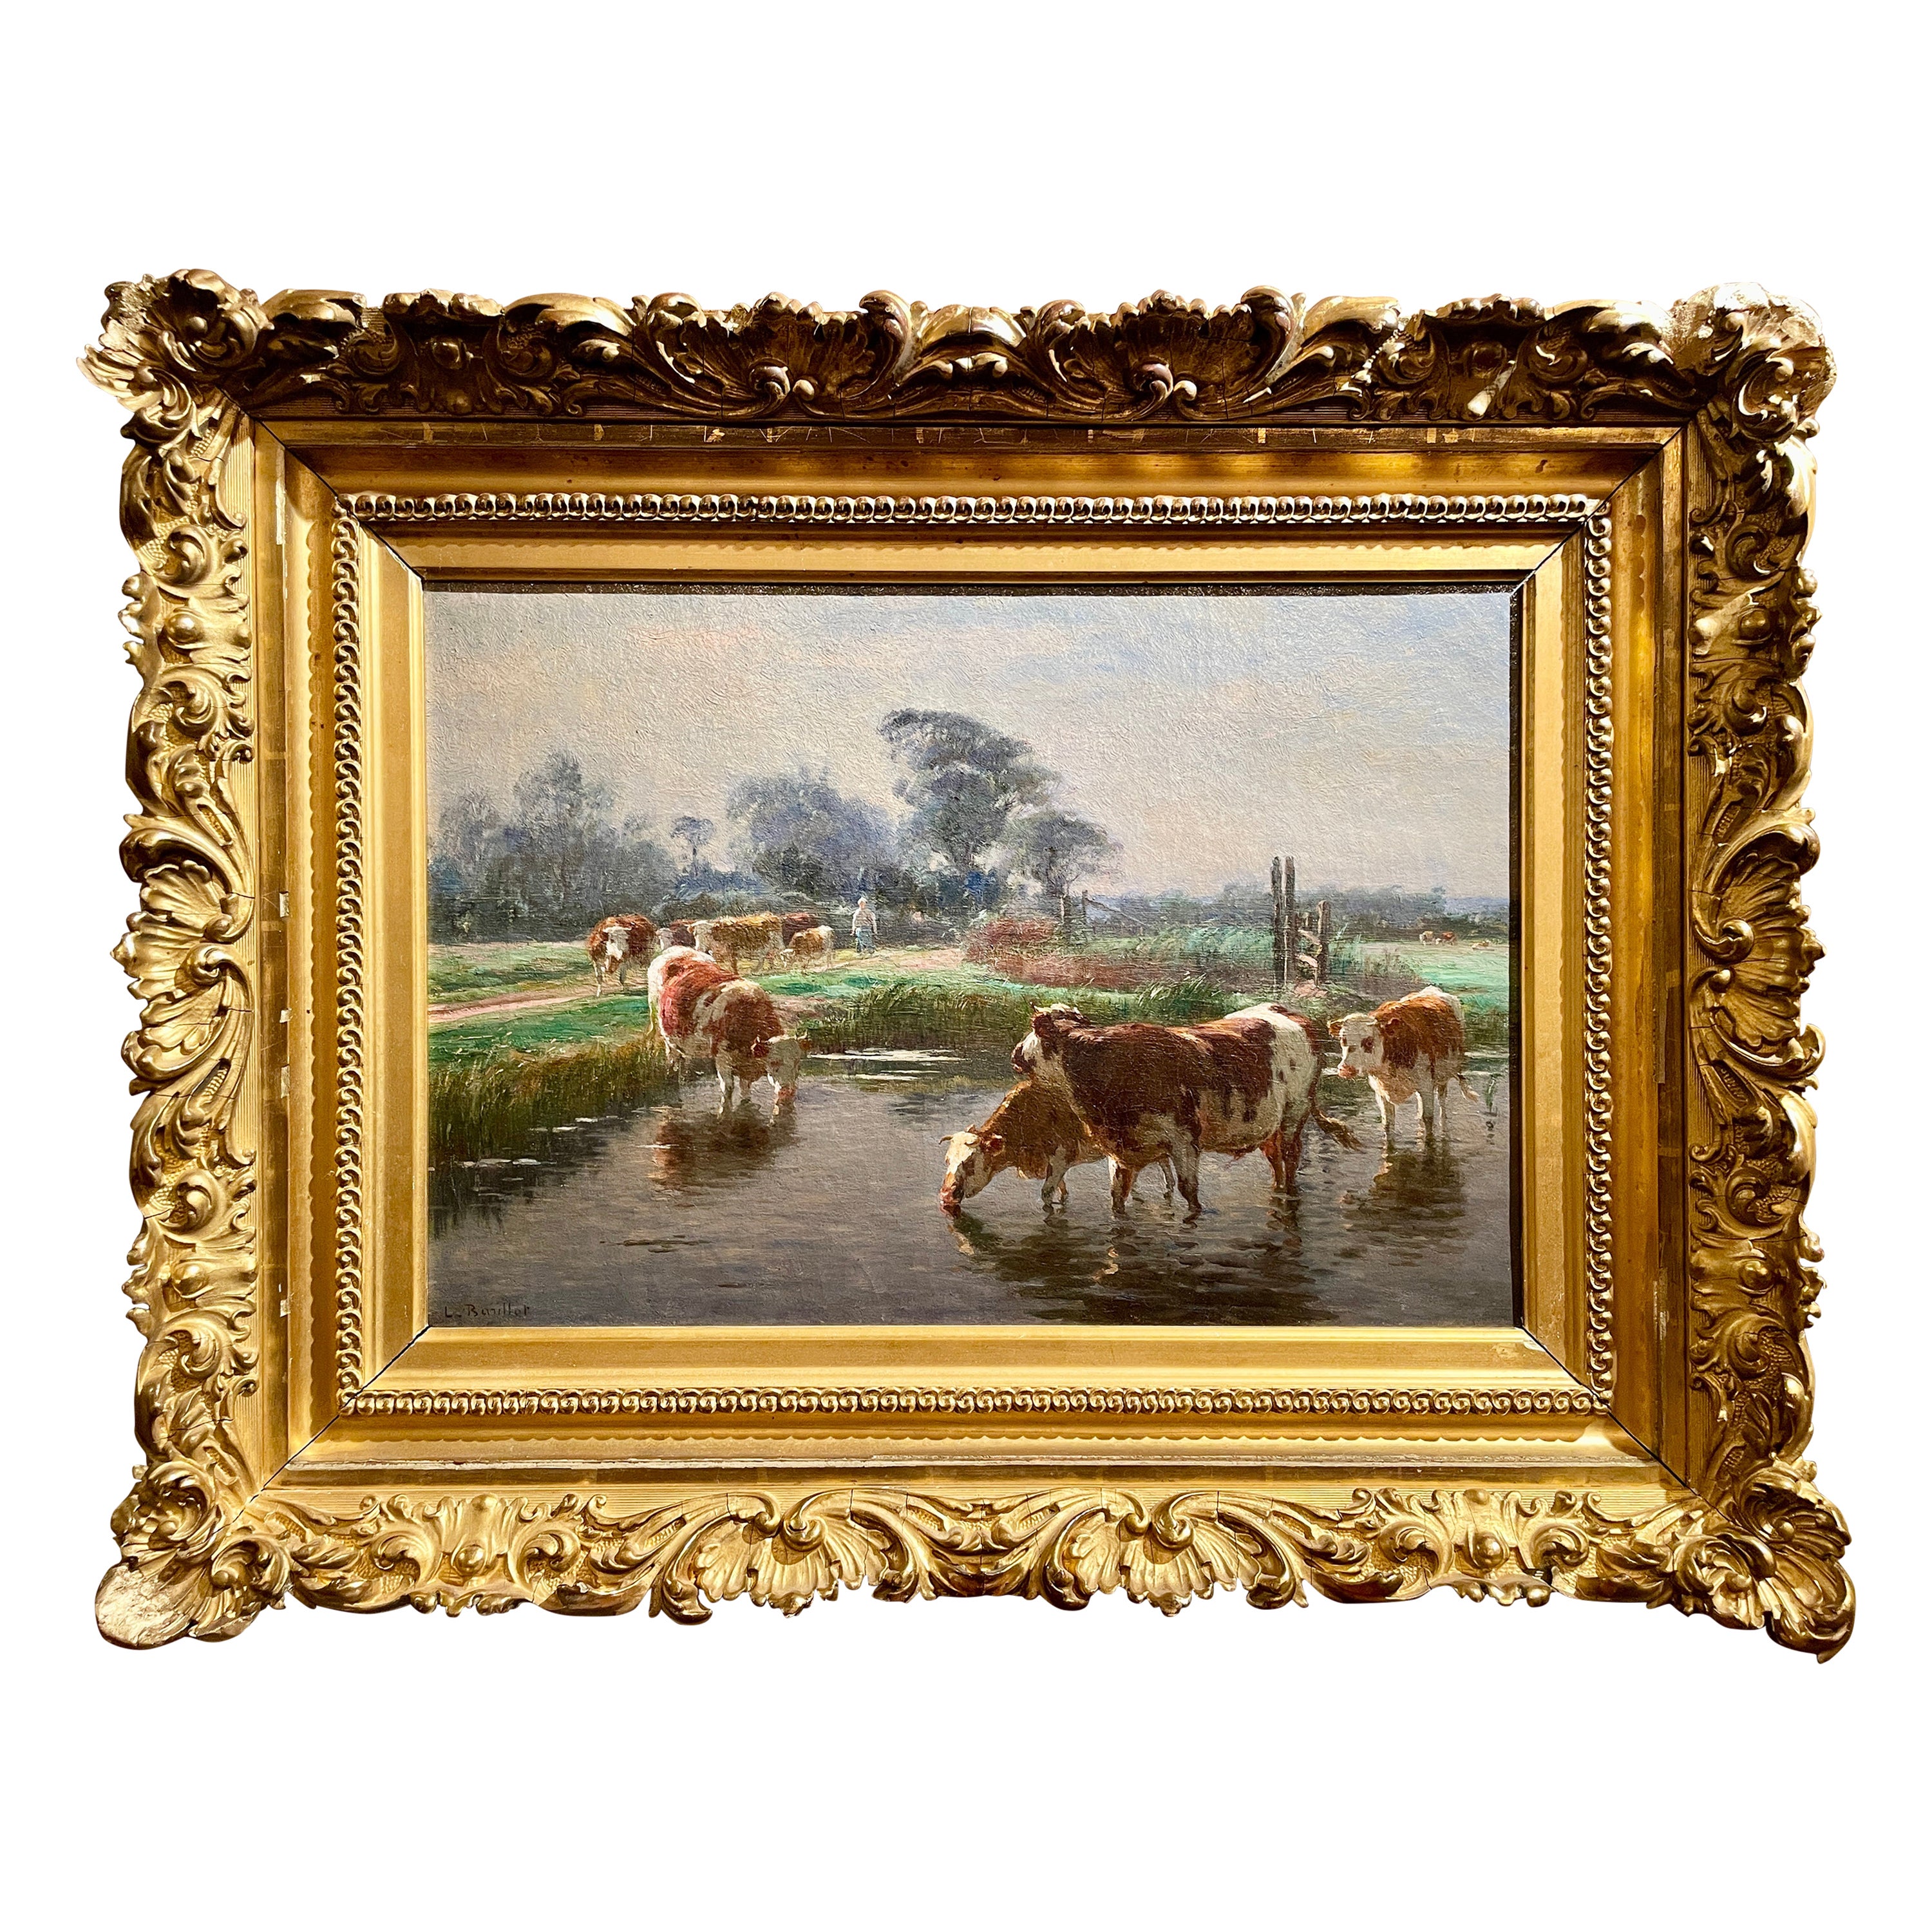 Antique French Oil on Canvas Landscape Painting firmato Léon Barillot, circa 1890